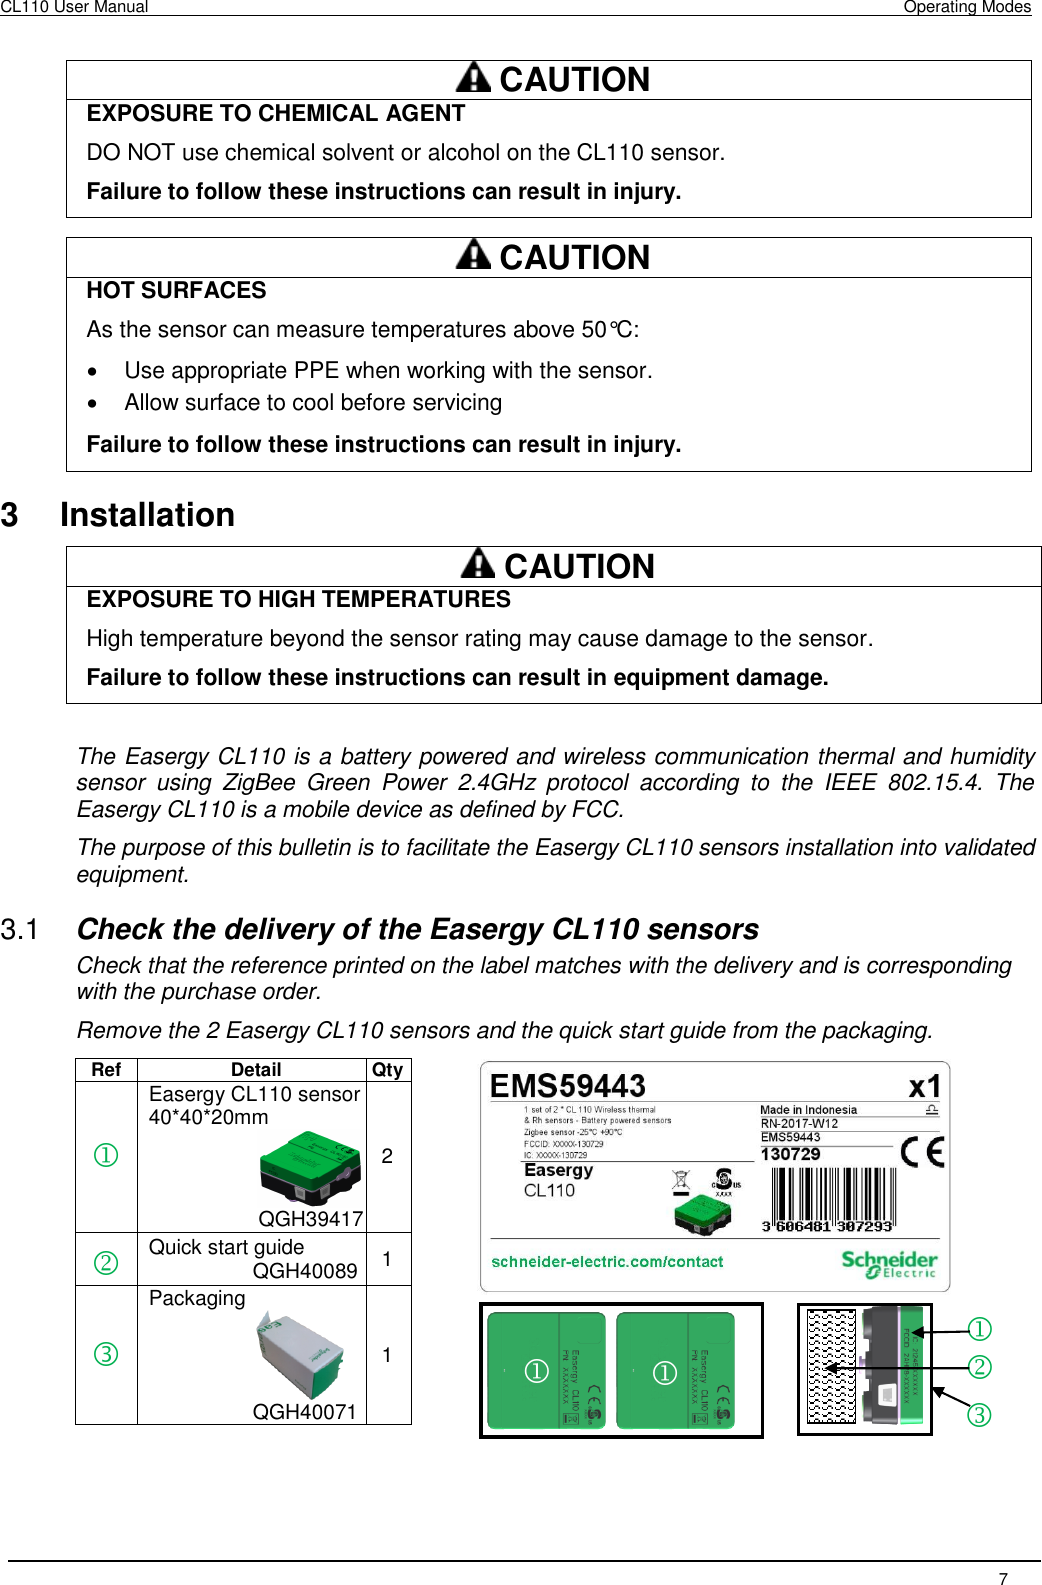 CL110 User Manual    Operating Modes   7    CAUTION EXPOSURE TO CHEMICAL AGENT DO NOT use chemical solvent or alcohol on the CL110 sensor. Failure to follow these instructions can result in injury.   CAUTION HOT SURFACES  As the sensor can measure temperatures above 50°C:   Use appropriate PPE when working with the sensor.   Allow surface to cool before servicing Failure to follow these instructions can result in injury.  3  Installation  CAUTION EXPOSURE TO HIGH TEMPERATURES High temperature beyond the sensor rating may cause damage to the sensor. Failure to follow these instructions can result in equipment damage.  The Easergy CL110 is a battery powered and wireless communication thermal and humidity sensor  using  ZigBee  Green  Power  2.4GHz  protocol  according  to  the  IEEE  802.15.4.  The Easergy CL110 is a mobile device as defined by FCC. The purpose of this bulletin is to facilitate the Easergy CL110 sensors installation into validated equipment. 3.1  Check the delivery of the Easergy CL110 sensors Check that the reference printed on the label matches with the delivery and is corresponding with the purchase order. Remove the 2 Easergy CL110 sensors and the quick start guide from the packaging.  Ref Detail Qty  Easergy CL110 sensor   40*40*20mm  QGH39417                                                        2  Quick start guide                   QGH40089 1  Packaging                                             QGH40071       1      